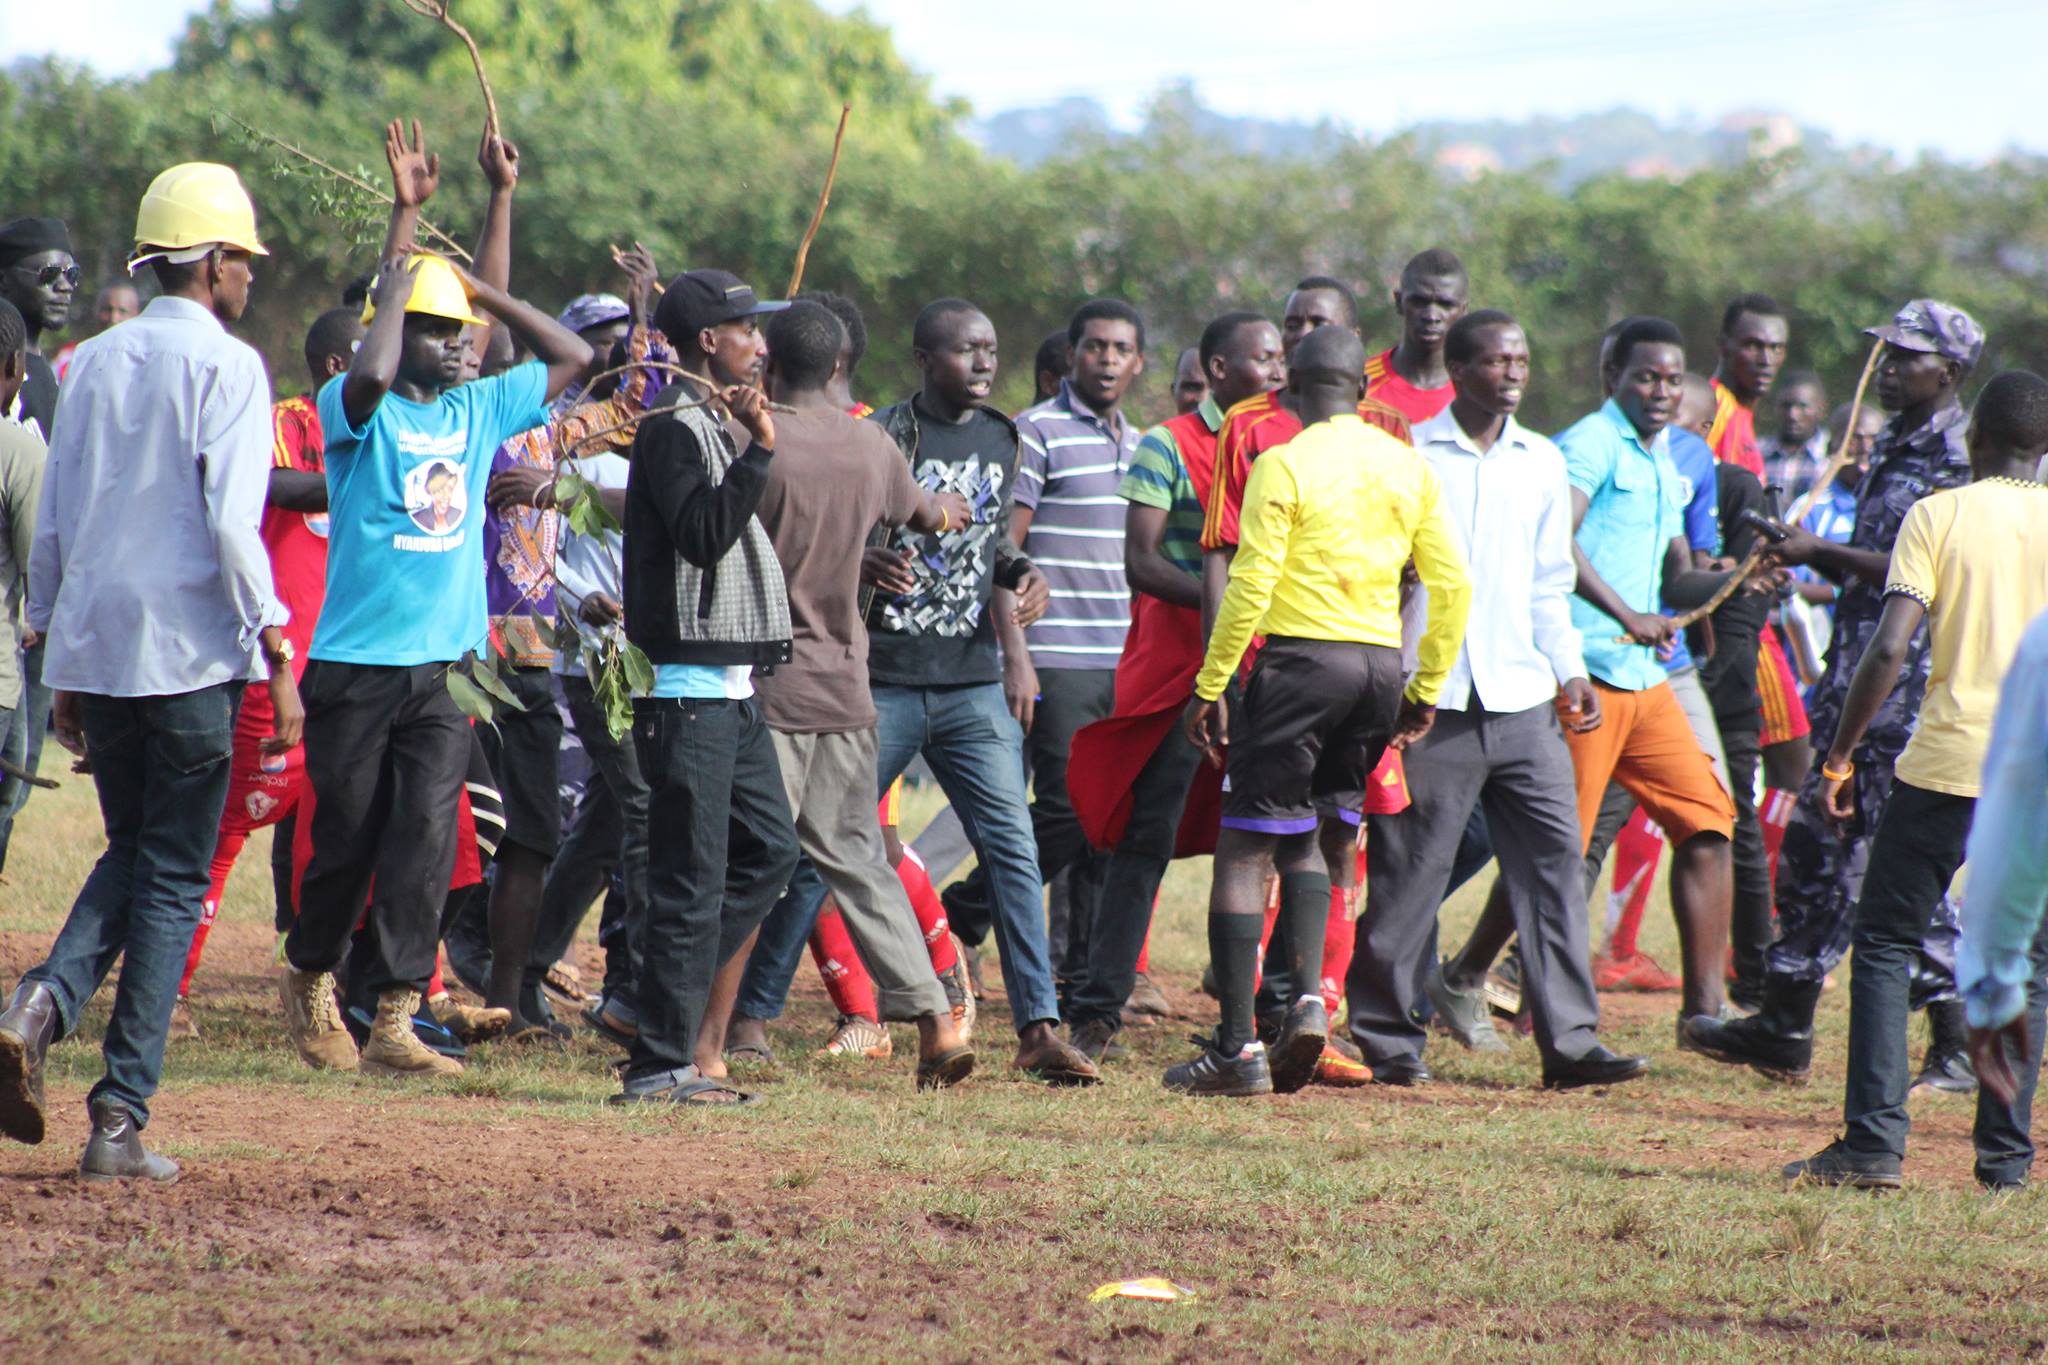 Makerere supporters with sticks attacking Jude Kalemeera.